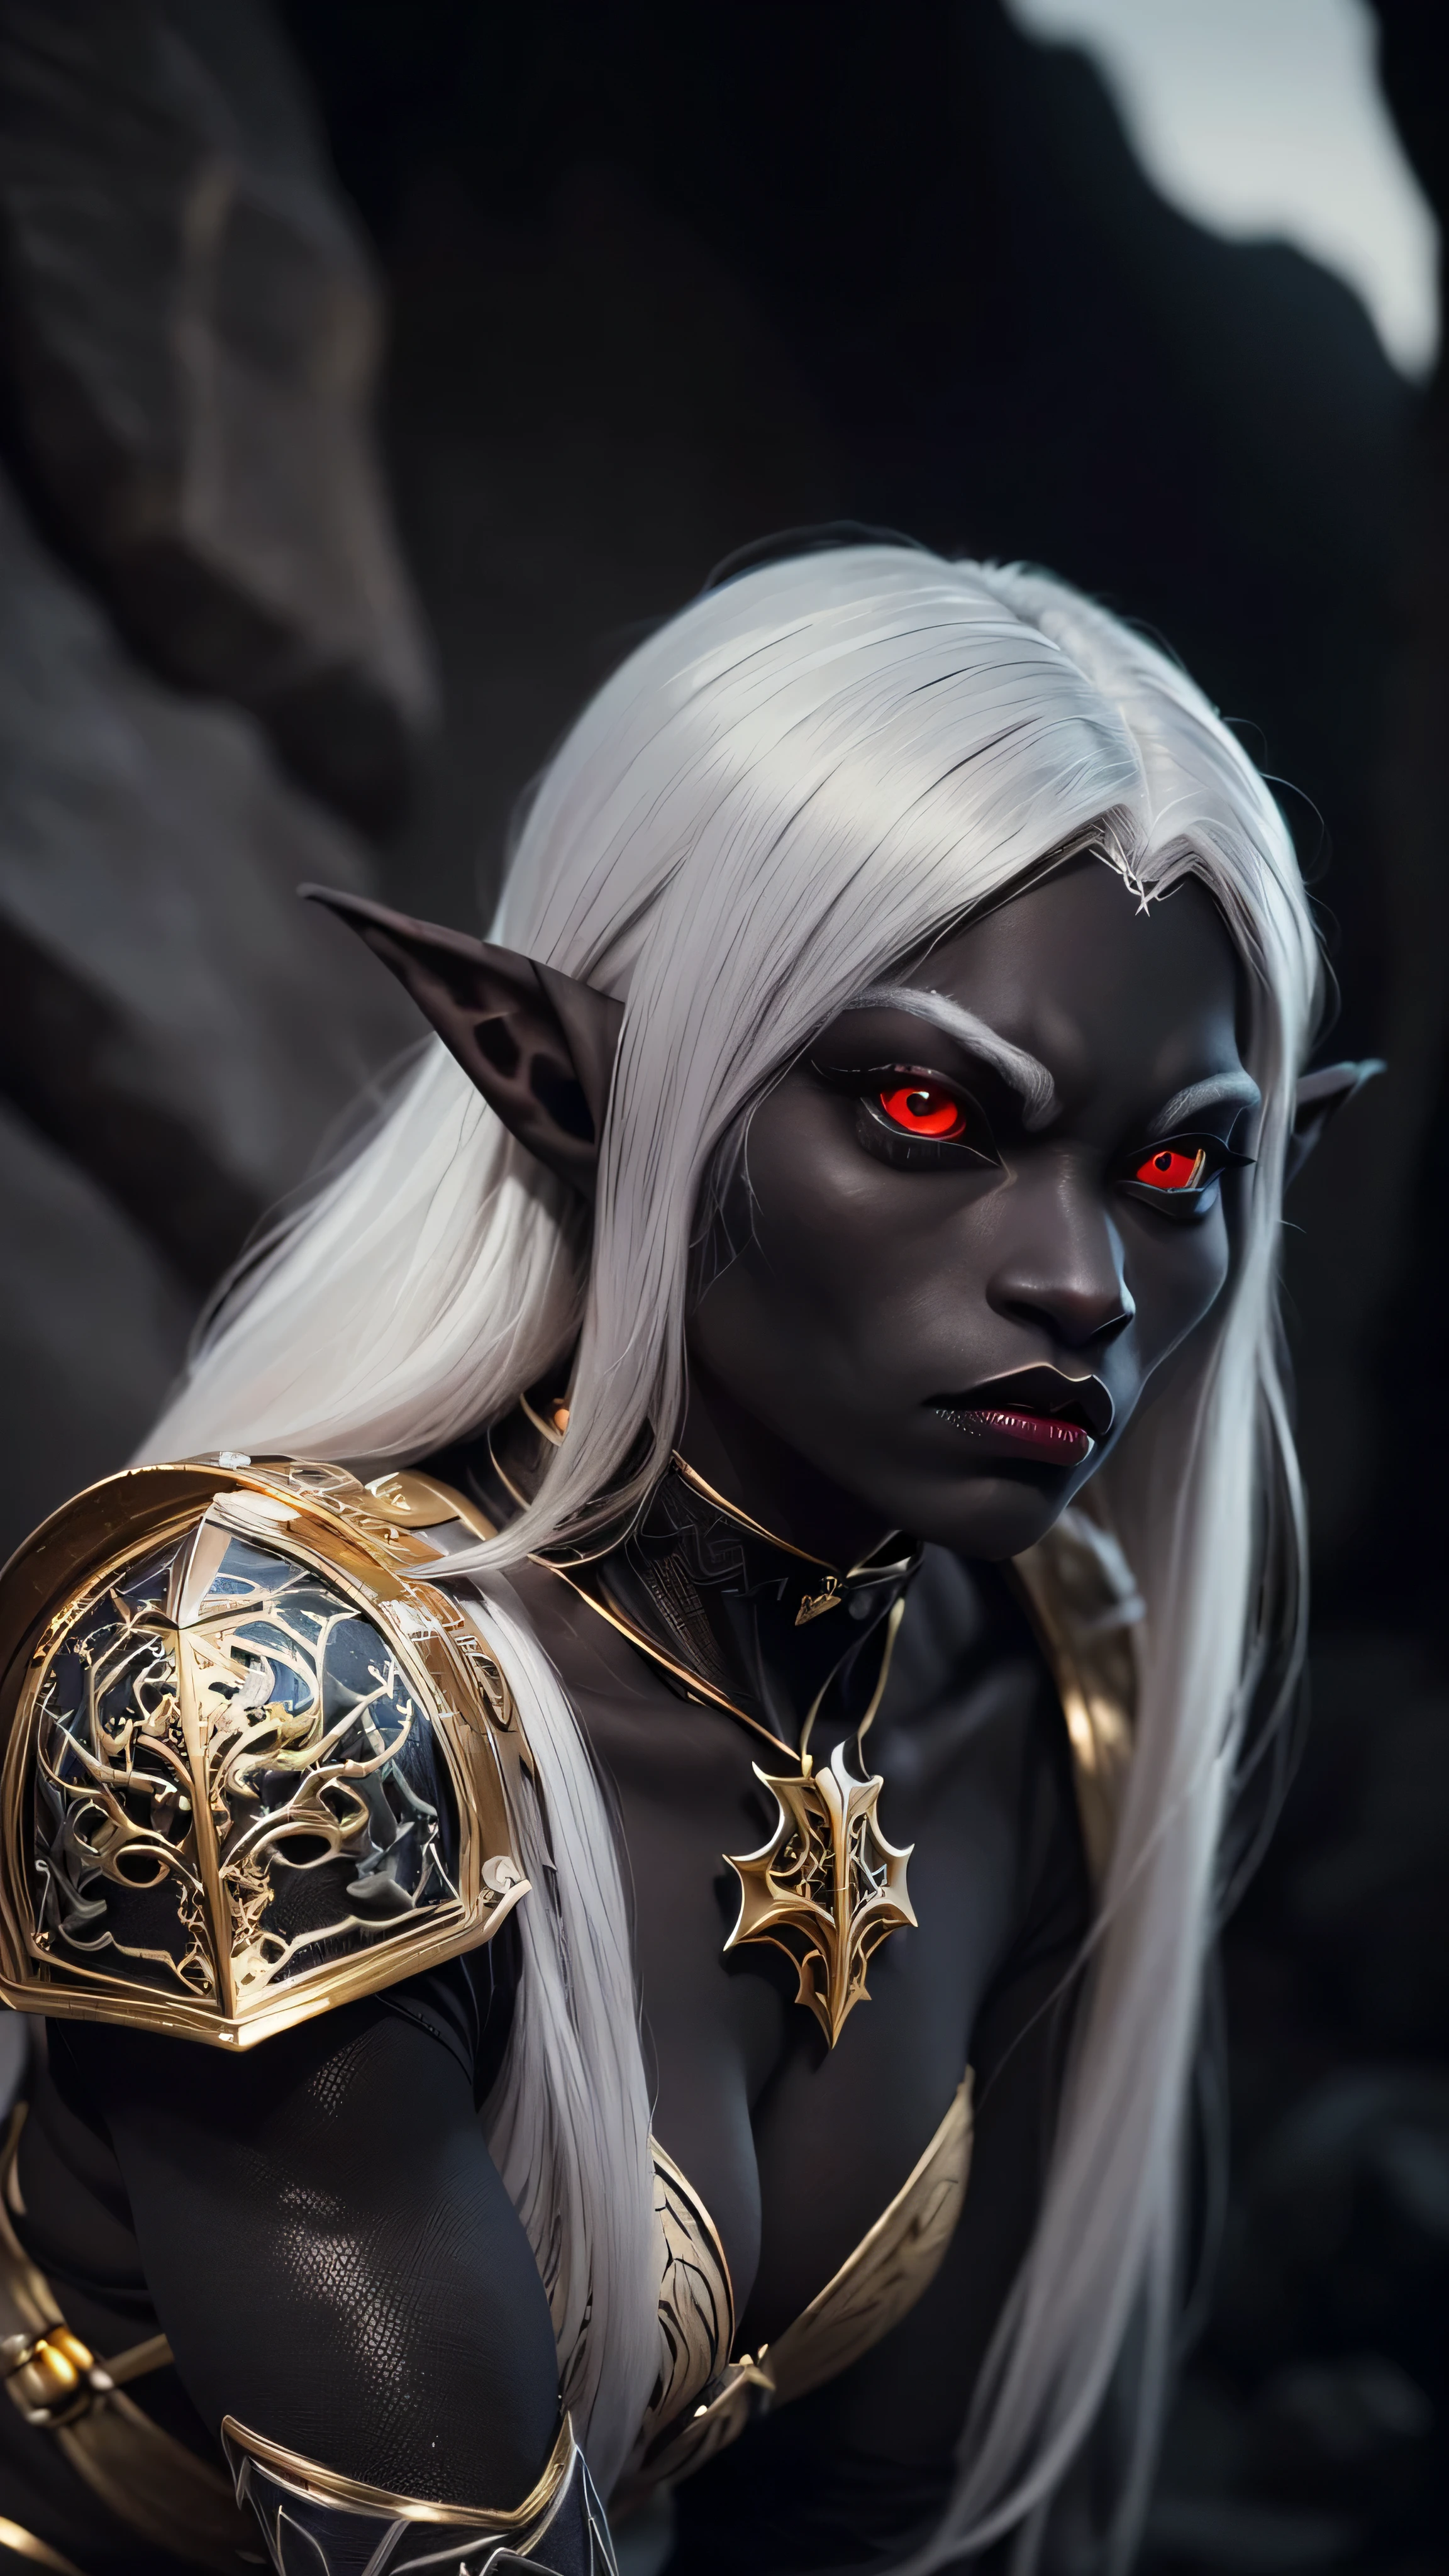 ((best quality: 1.5)) ((masterpiece: 0.8)), intricate details, sharp focus, professional, real life, realistic representation of the face, dim lighting, flickering shadow, side view: 1.5, dynamic pose, in the style of realistic and hyper detailed renderings BREAK (((detailed 18year ((((graphite skin drow elf mistress)), blackout gothic eye makeup, cavern, lacquered black knight armor, gold filigree breastplate, red lips, cleft chin, exotic, muscular, (glowing white eyes, evil stare)), crouching, stalking)), long white hair), freckles: 1.3), photorealistic, hyper-realistic, 8K